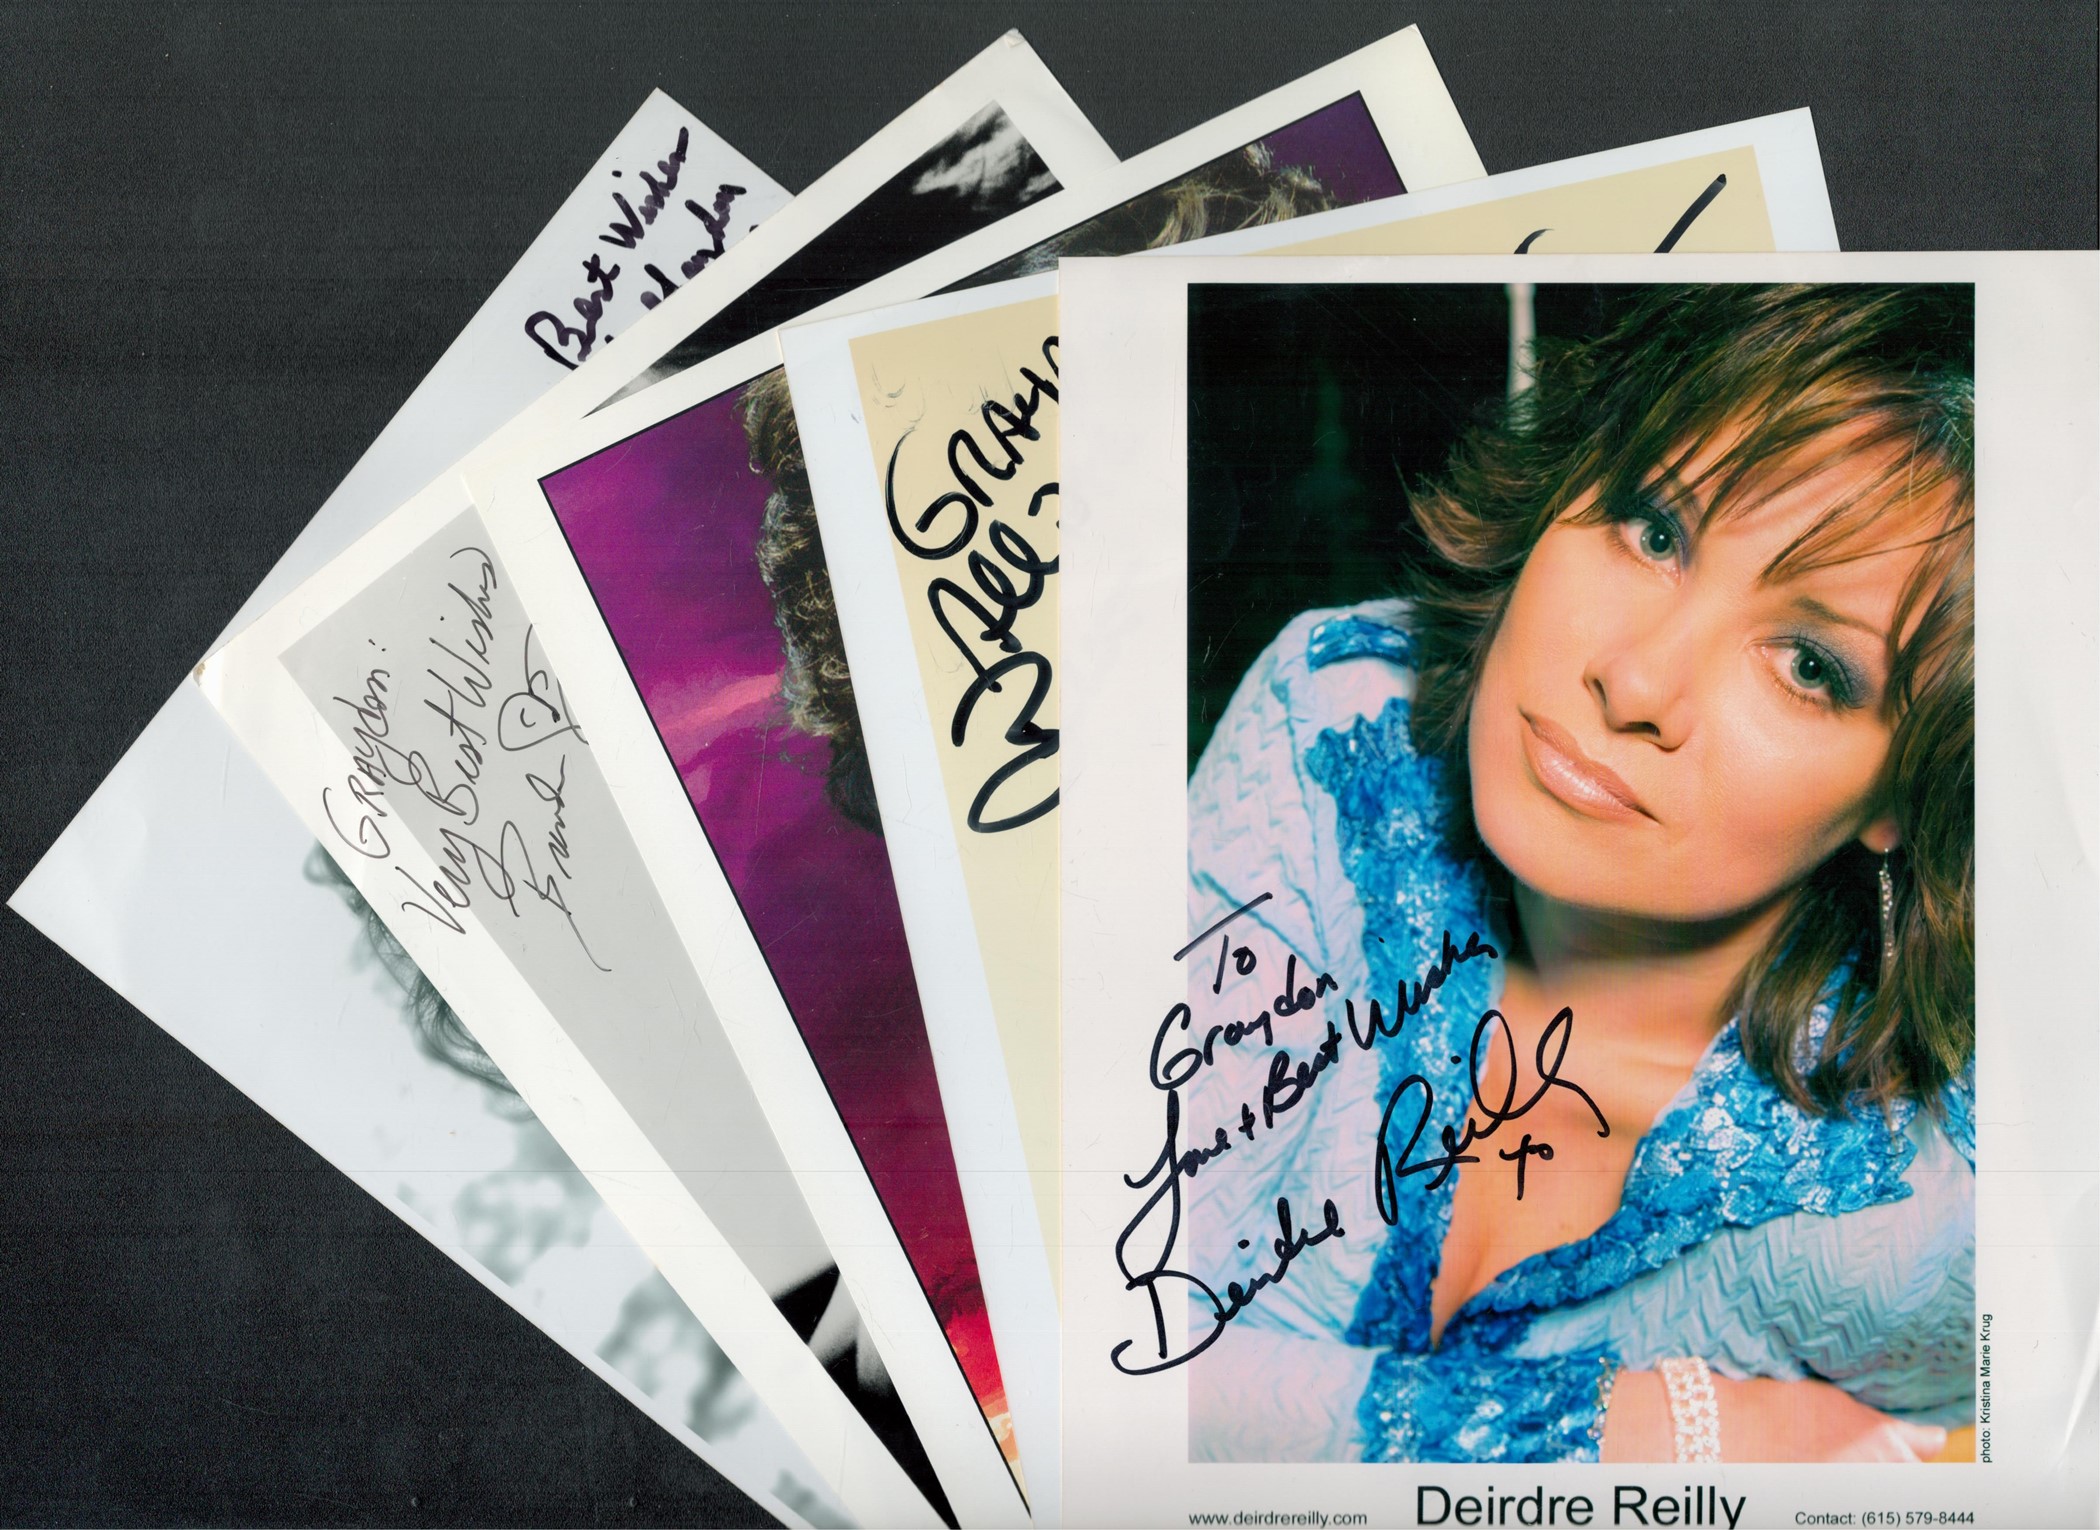 Singers/Musician/Composer. 5 x Collection Signed 10x8 Inch. Signatures such as Deirdre Reilly. Clint